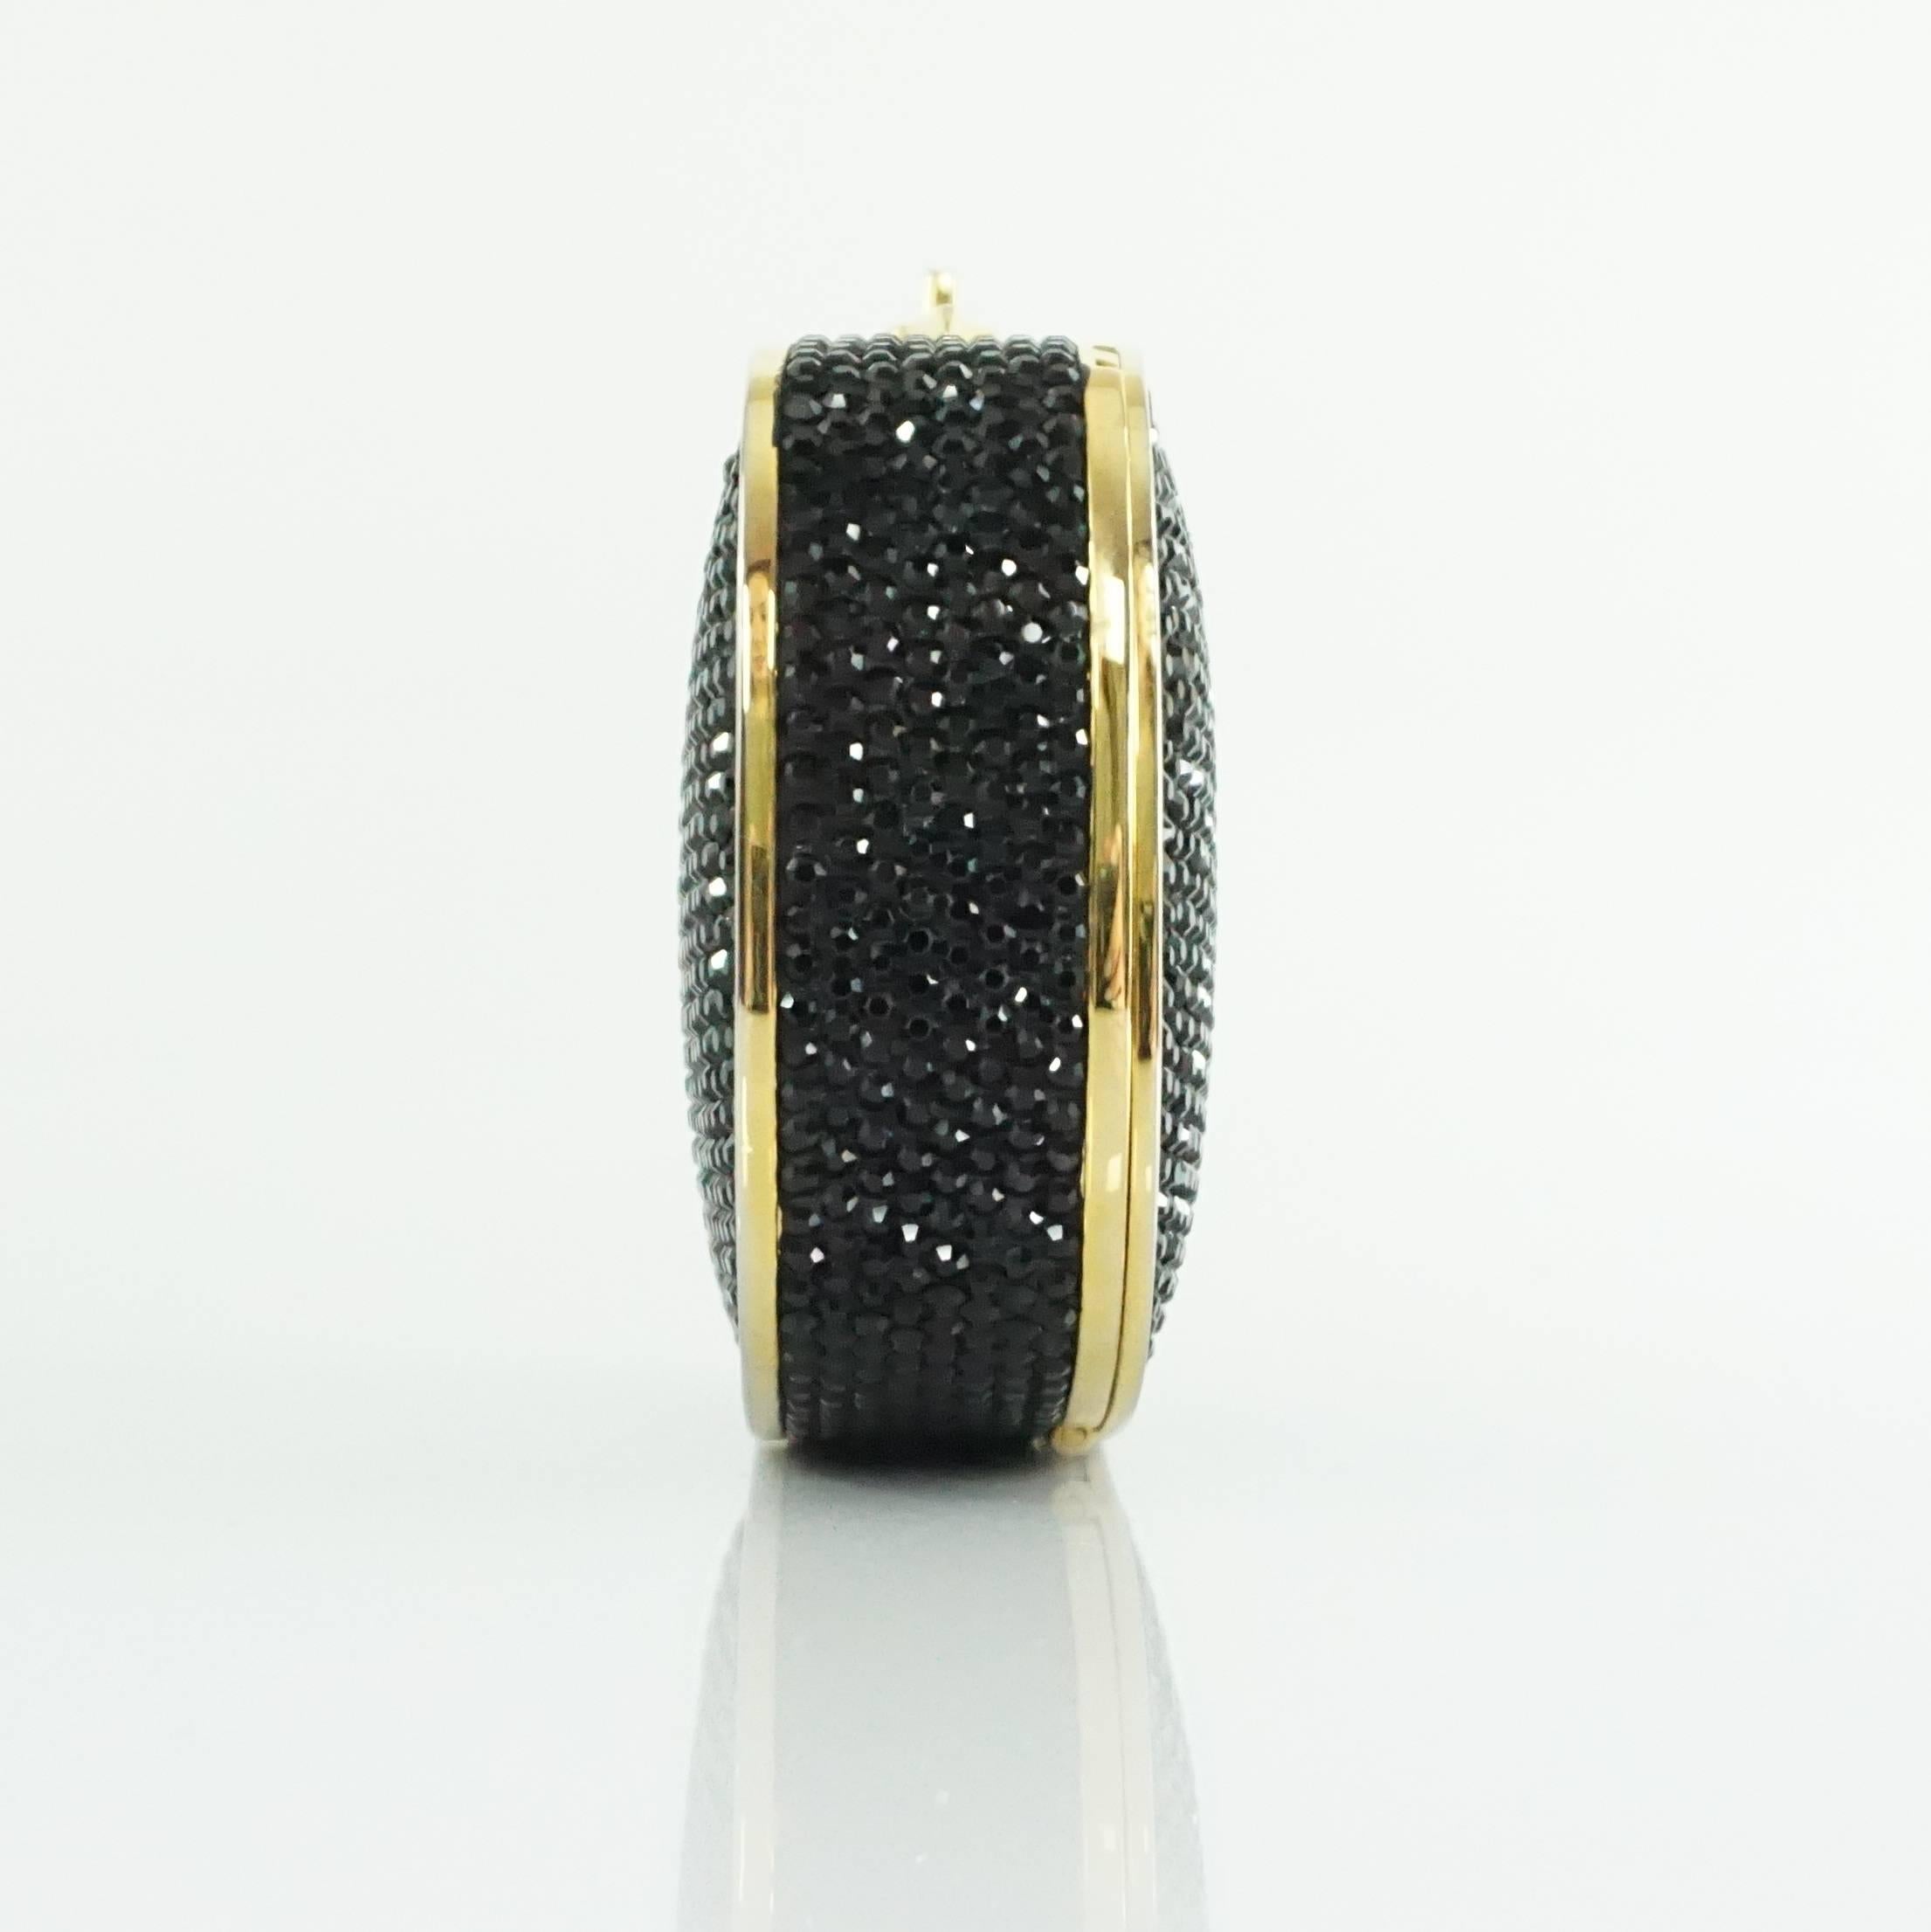 This beautiful Judith Leiber black rhinestone minaudiere has a gold strap that can be tucked inside. There is a gold trim and closure. This bag is in excellent condition.

Measurements
Width: 3.75"
Length: 4.8"
Depth: 1.2"
Handle